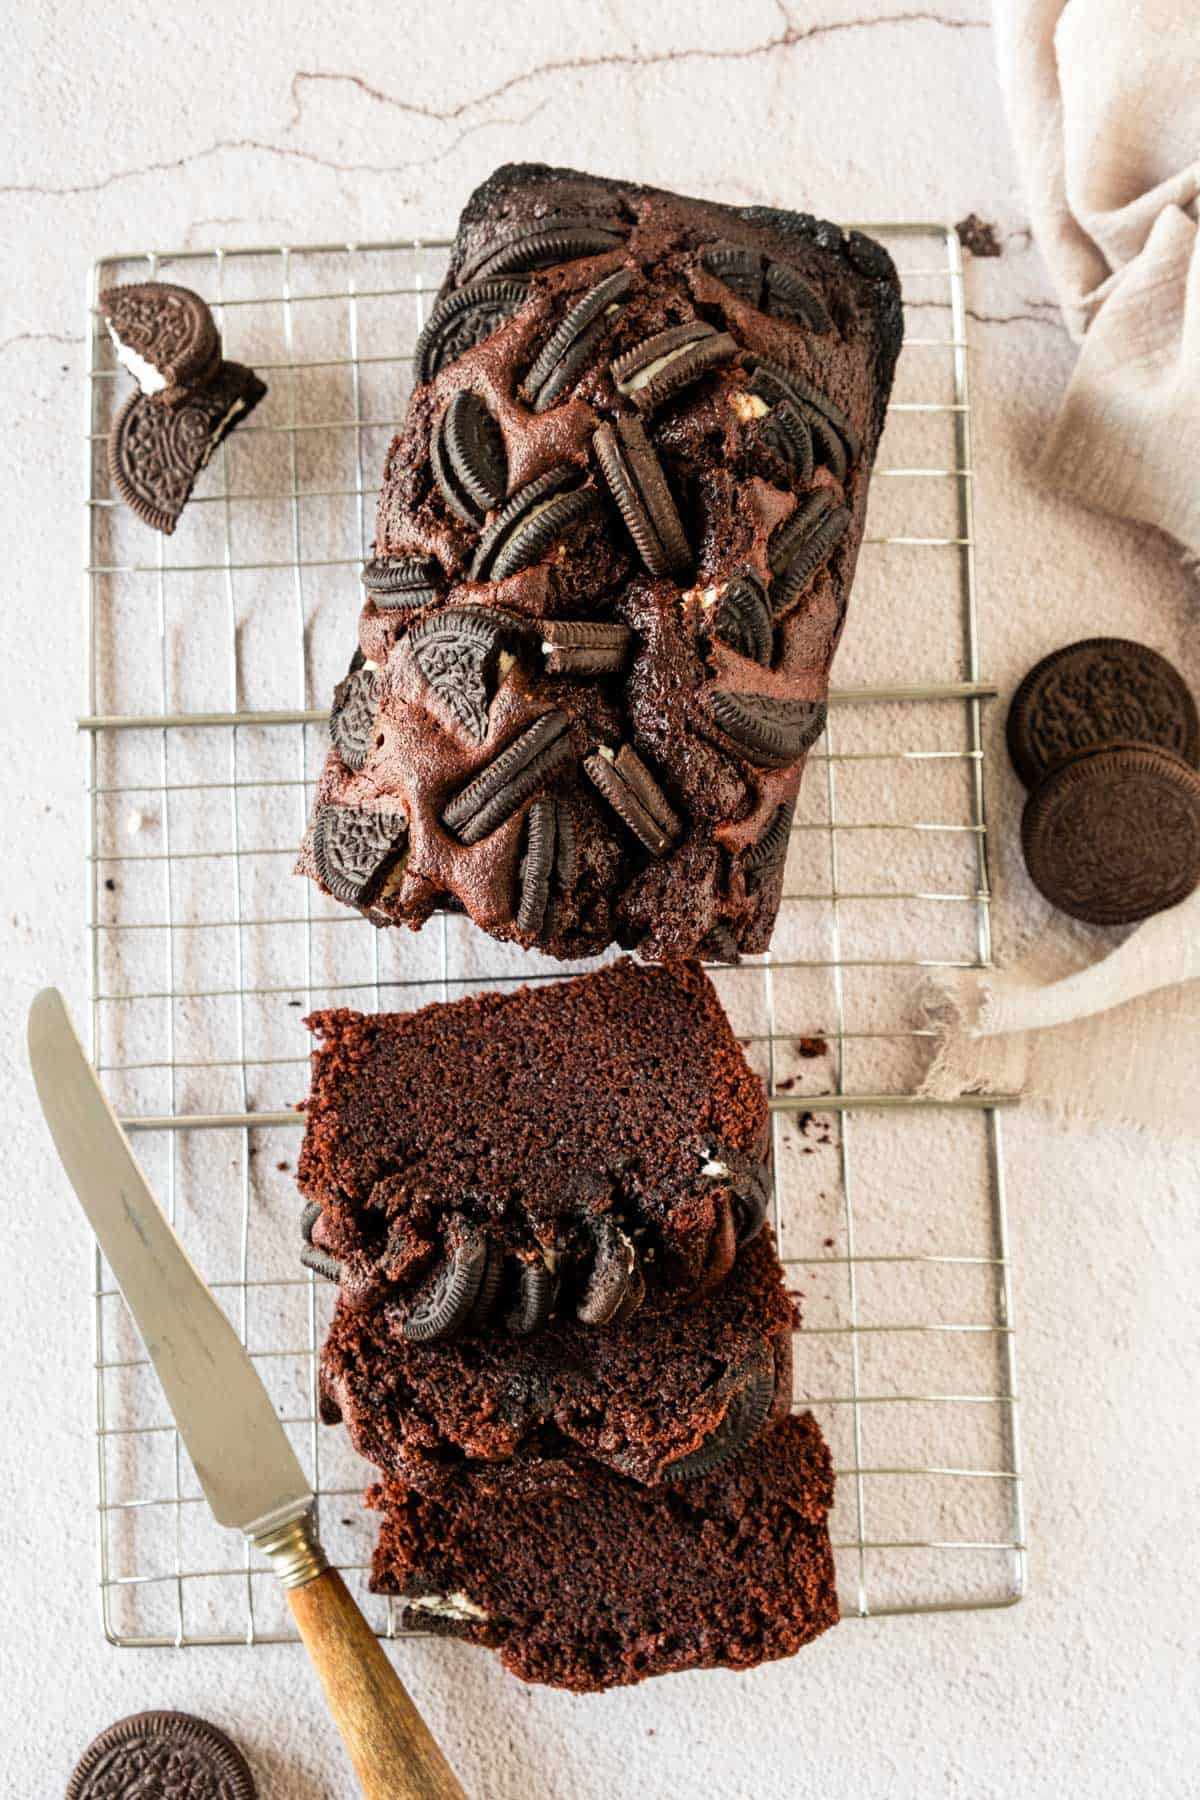 Chocolate loaf cake topped with cream and cookie pieces, with one slice partly cut, on a wire rack with cookies nearby.